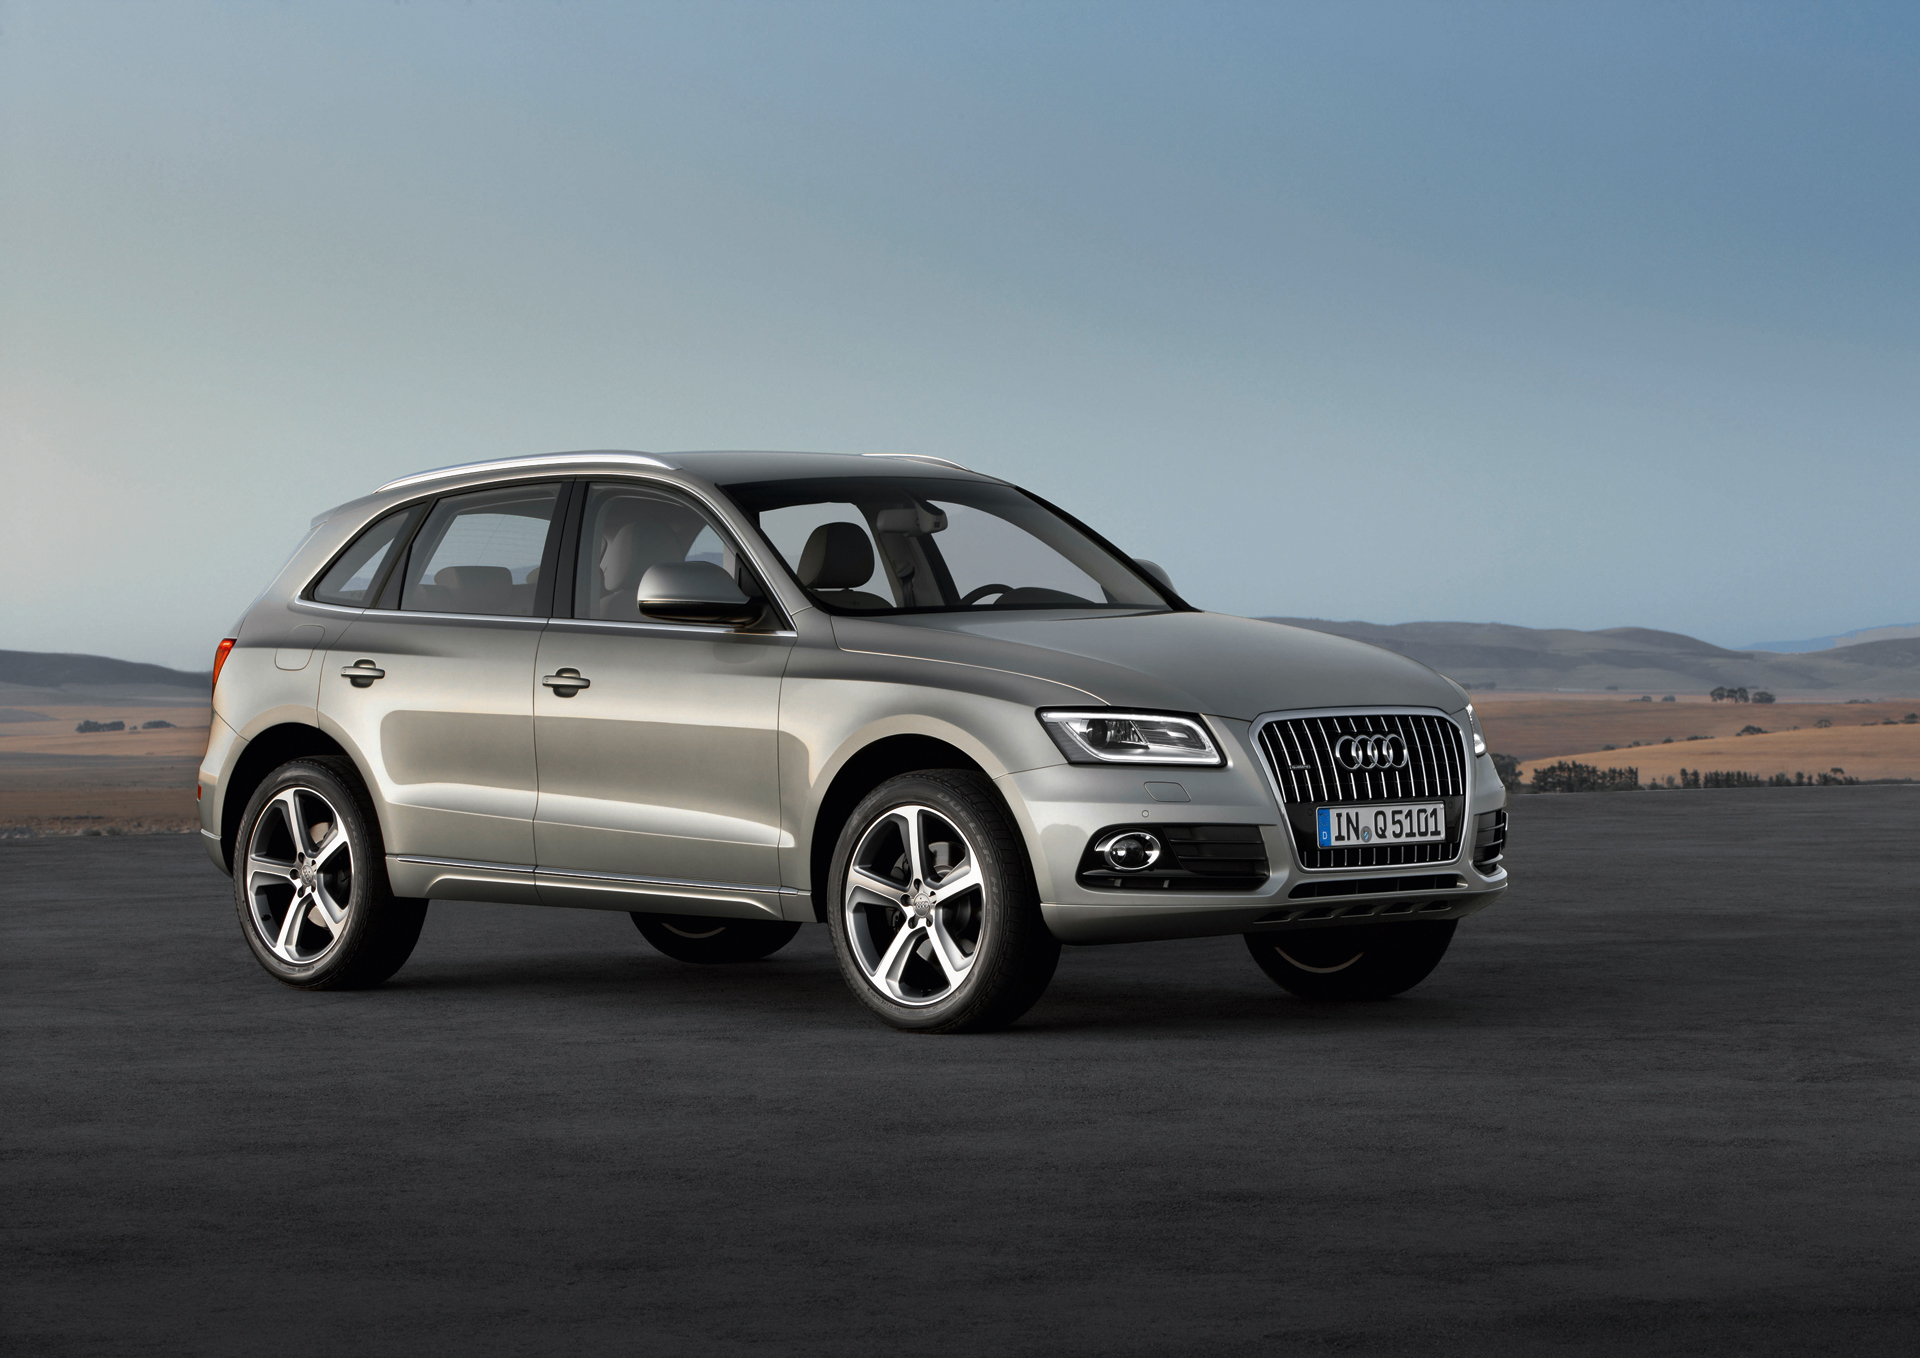 2013 Audi Q5 prices and expert review - The Car Connection